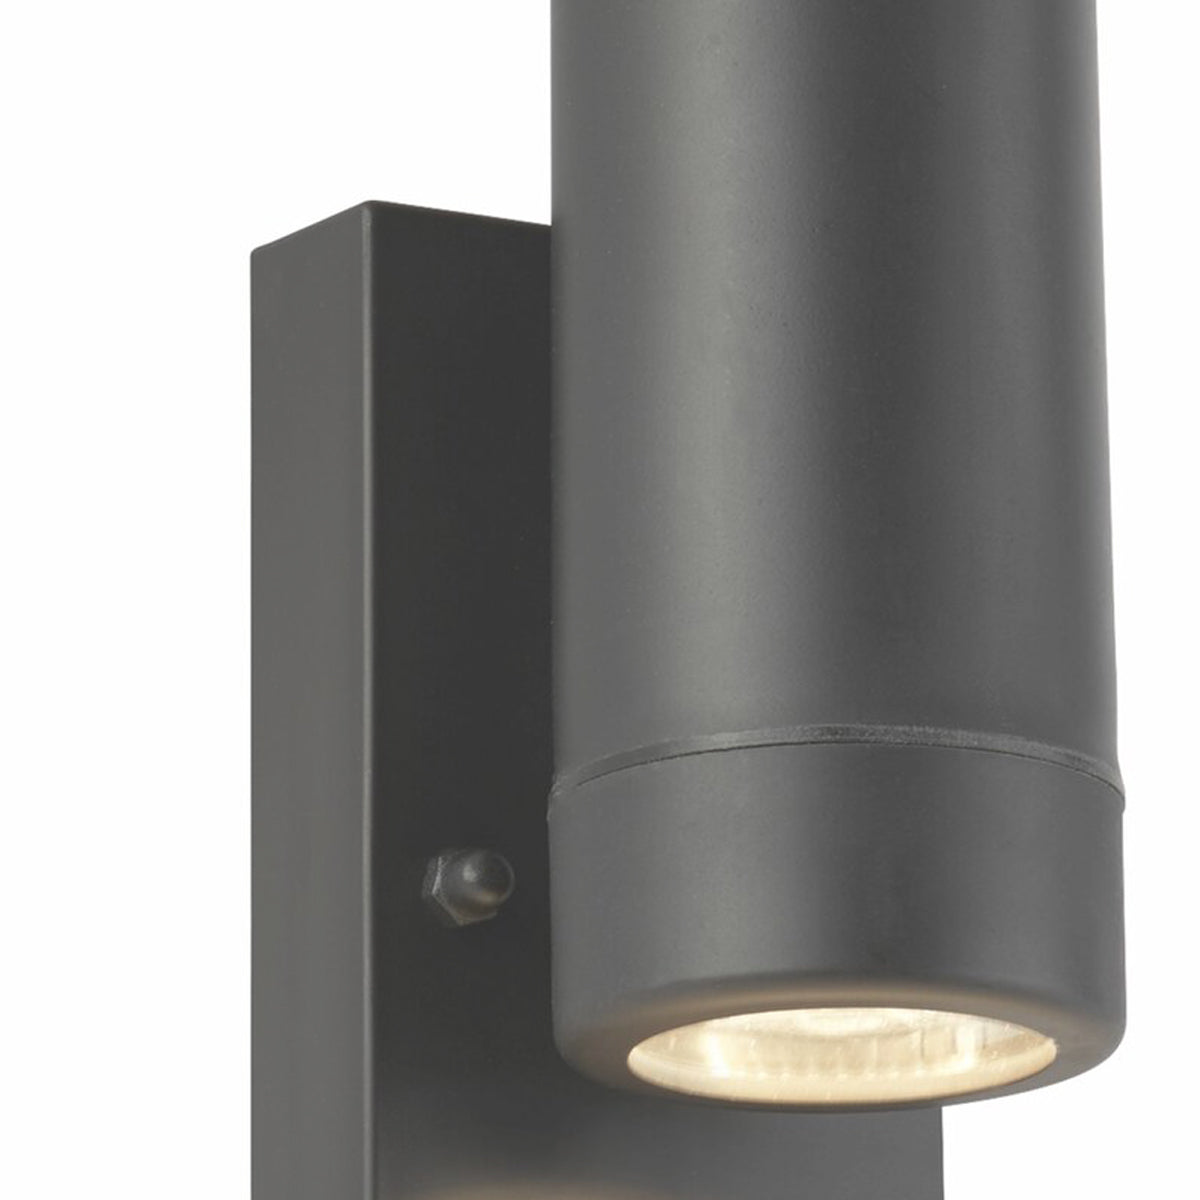 Our Valentine dark grey outdoor wall mounted up and down cylinder outdoor light with motion sensor would look perfect in a modern or more traditional home design. Outside wall lights can provide atmospheric light in your garden, at the front door or on the terrace as well as a great security solution. It is designed for durability and longevity with its robust material producing a fully weatherproof and water resistant light fitting.